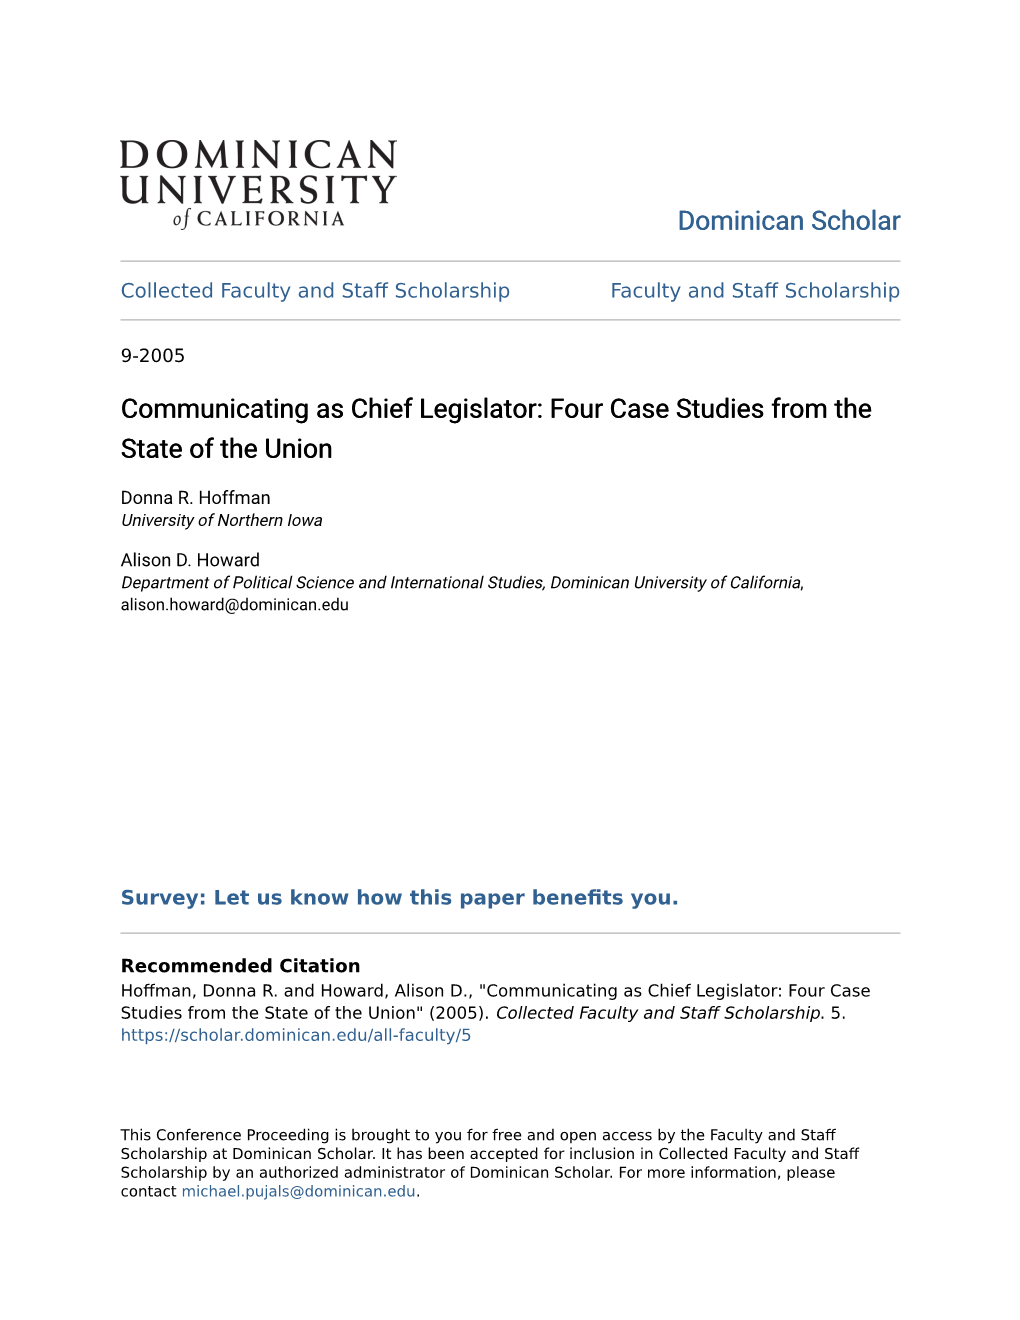 Communicating As Chief Legislator: Four Case Studies from the State of the Union